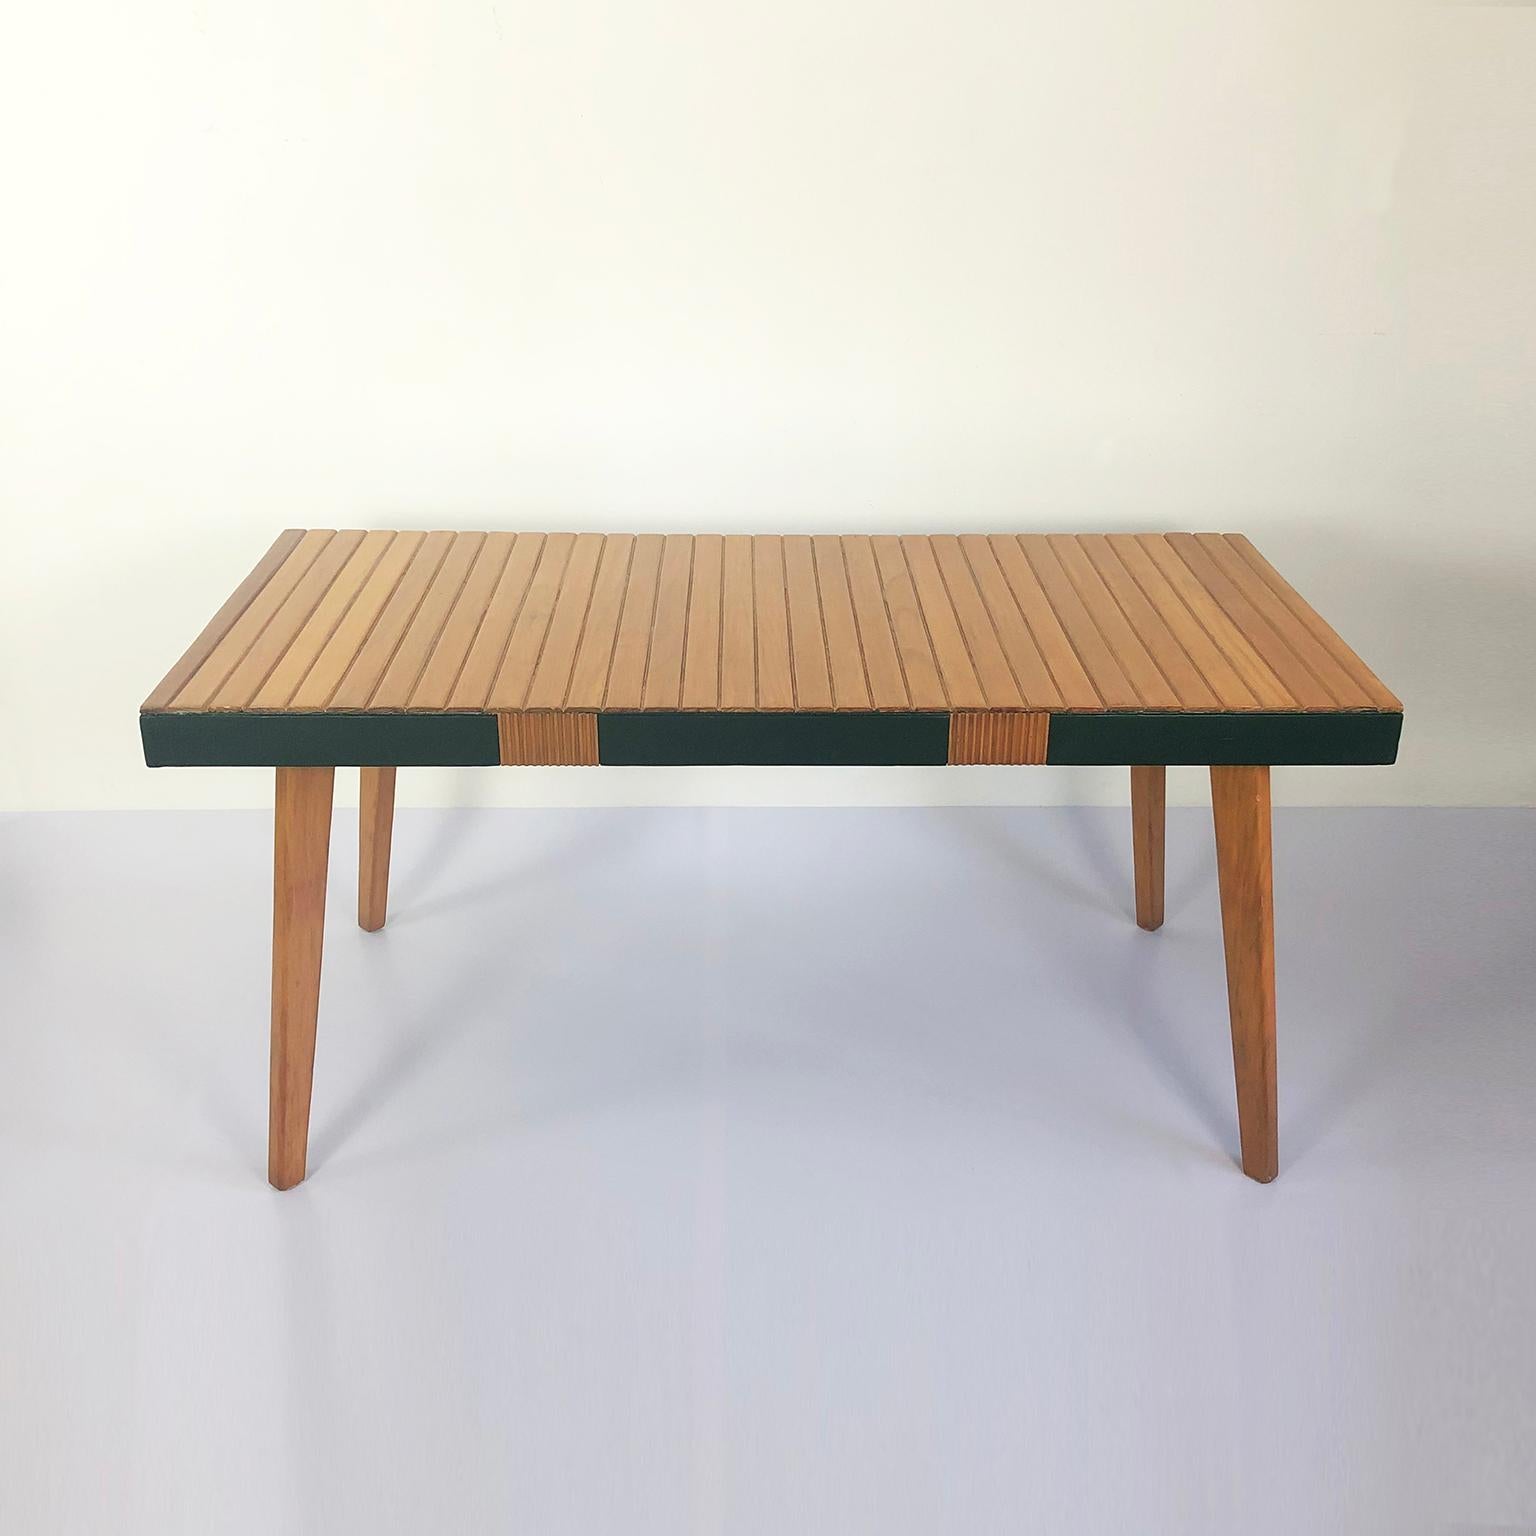 We offer this original Domus dinning set (Table and 4 chairs) in pine wood and with the characteristic green Van Beuren color, designed by the American Bauhaus designer, Michael Van Beuren in Mexico, circa 1950, this handmade, solid pine wood